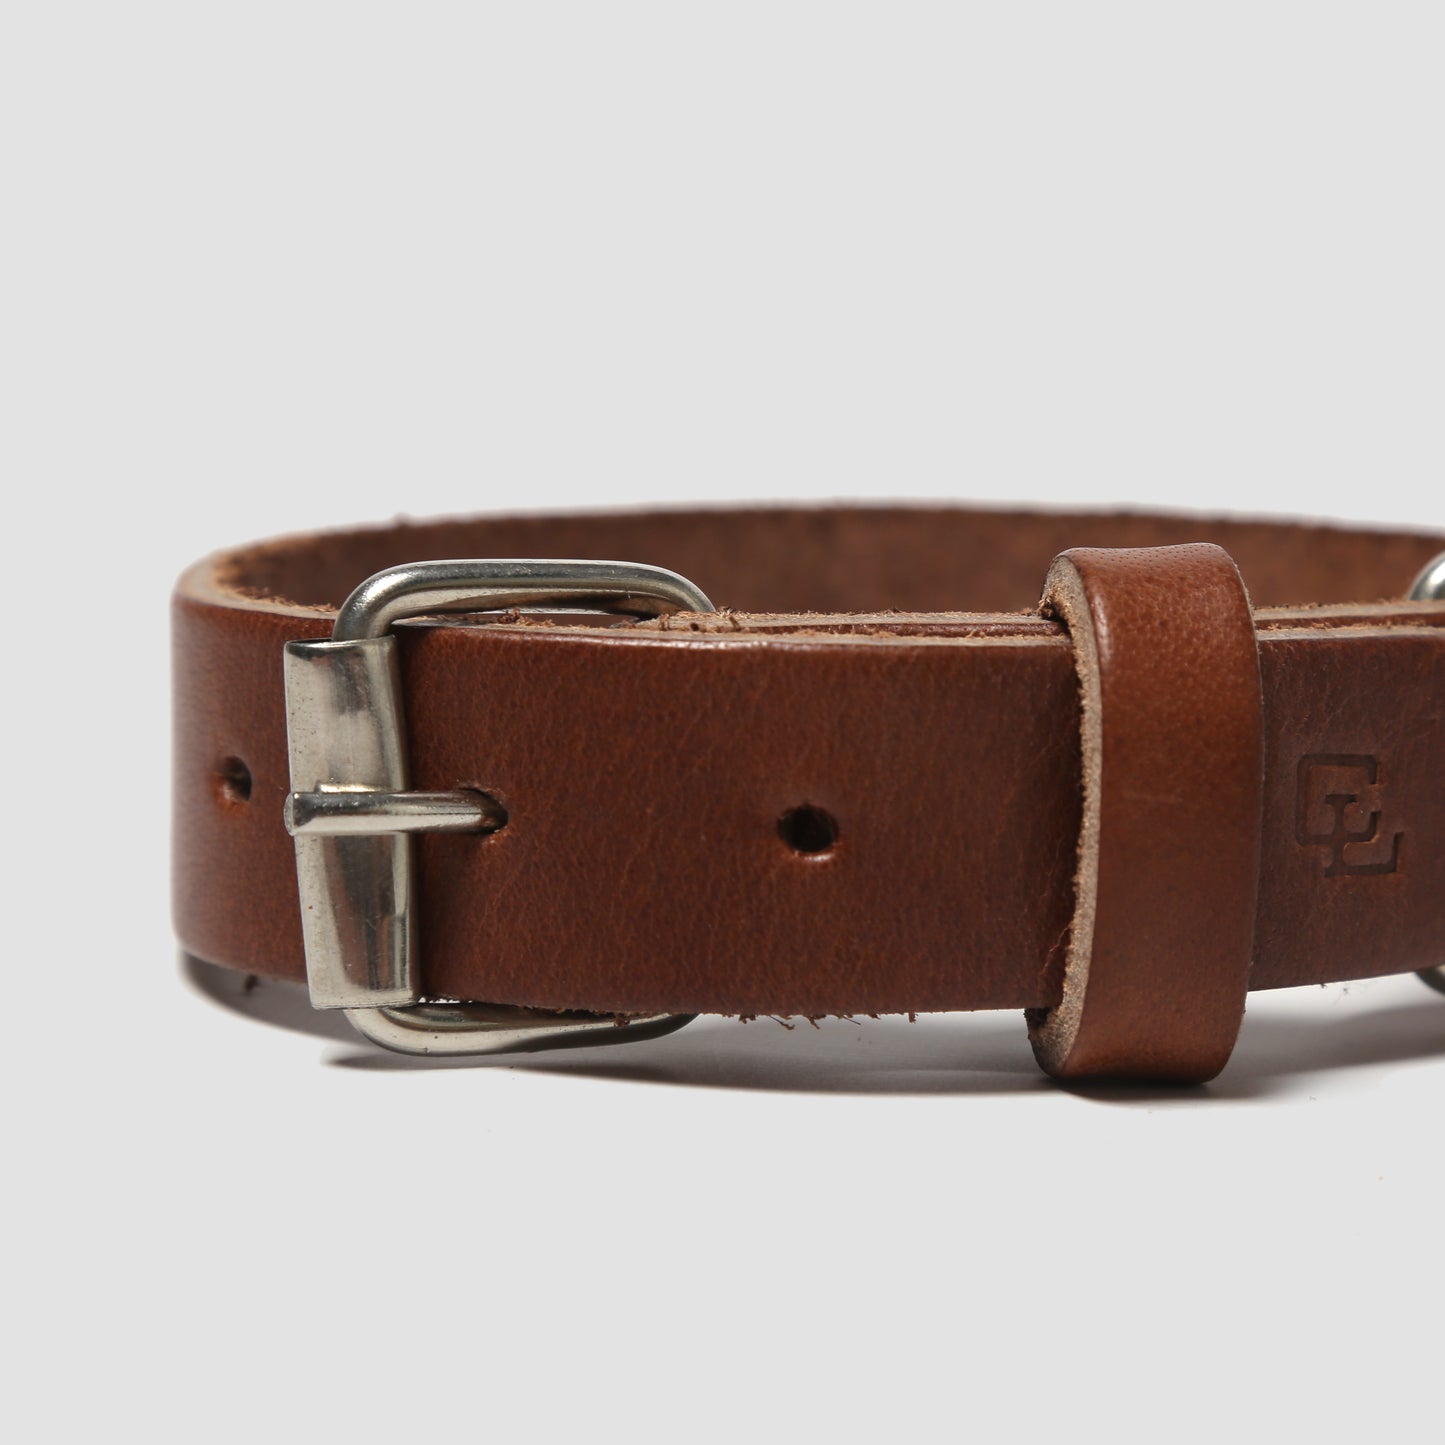 Leather Dog Collar // Brown Leather